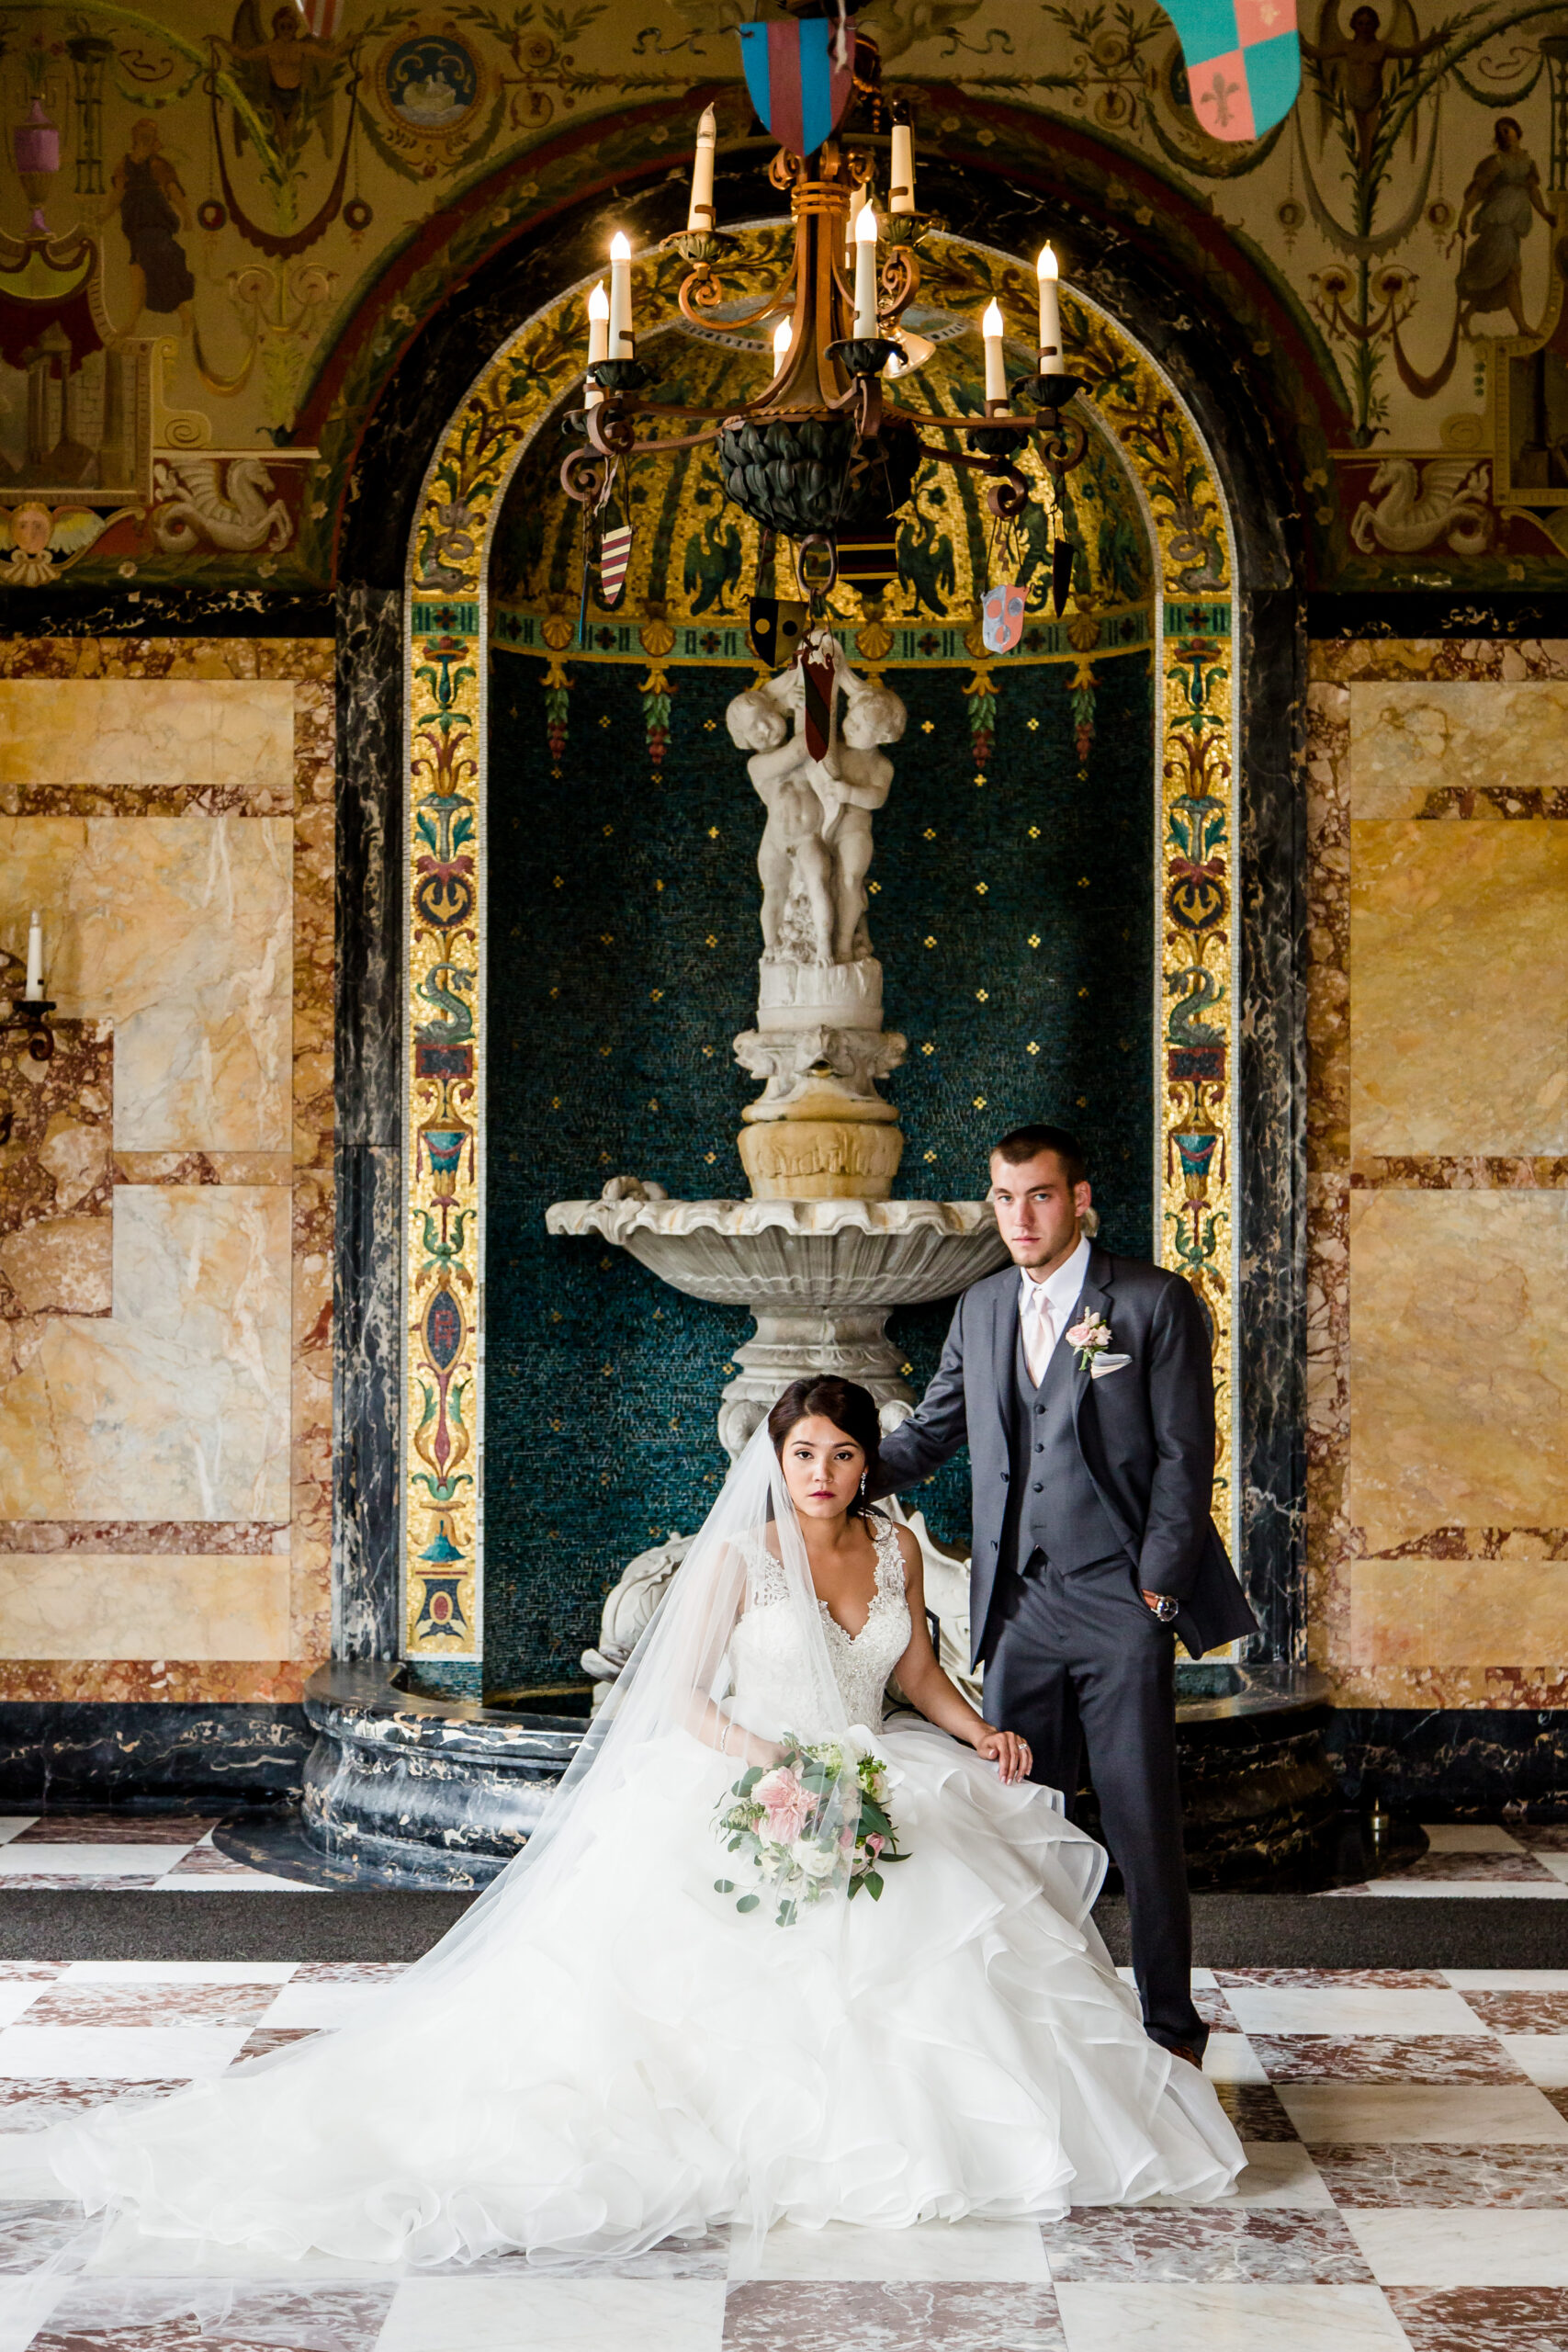 An elegant portrait of the bride seated with the groom standing right behind her in a glamorous room with a Spanish-inspired ambiance. The couple exudes sophistication and grace, capturing the essence of their special day, skillfully photographed by North Jersey wedding photographer Jarot Bocanegra